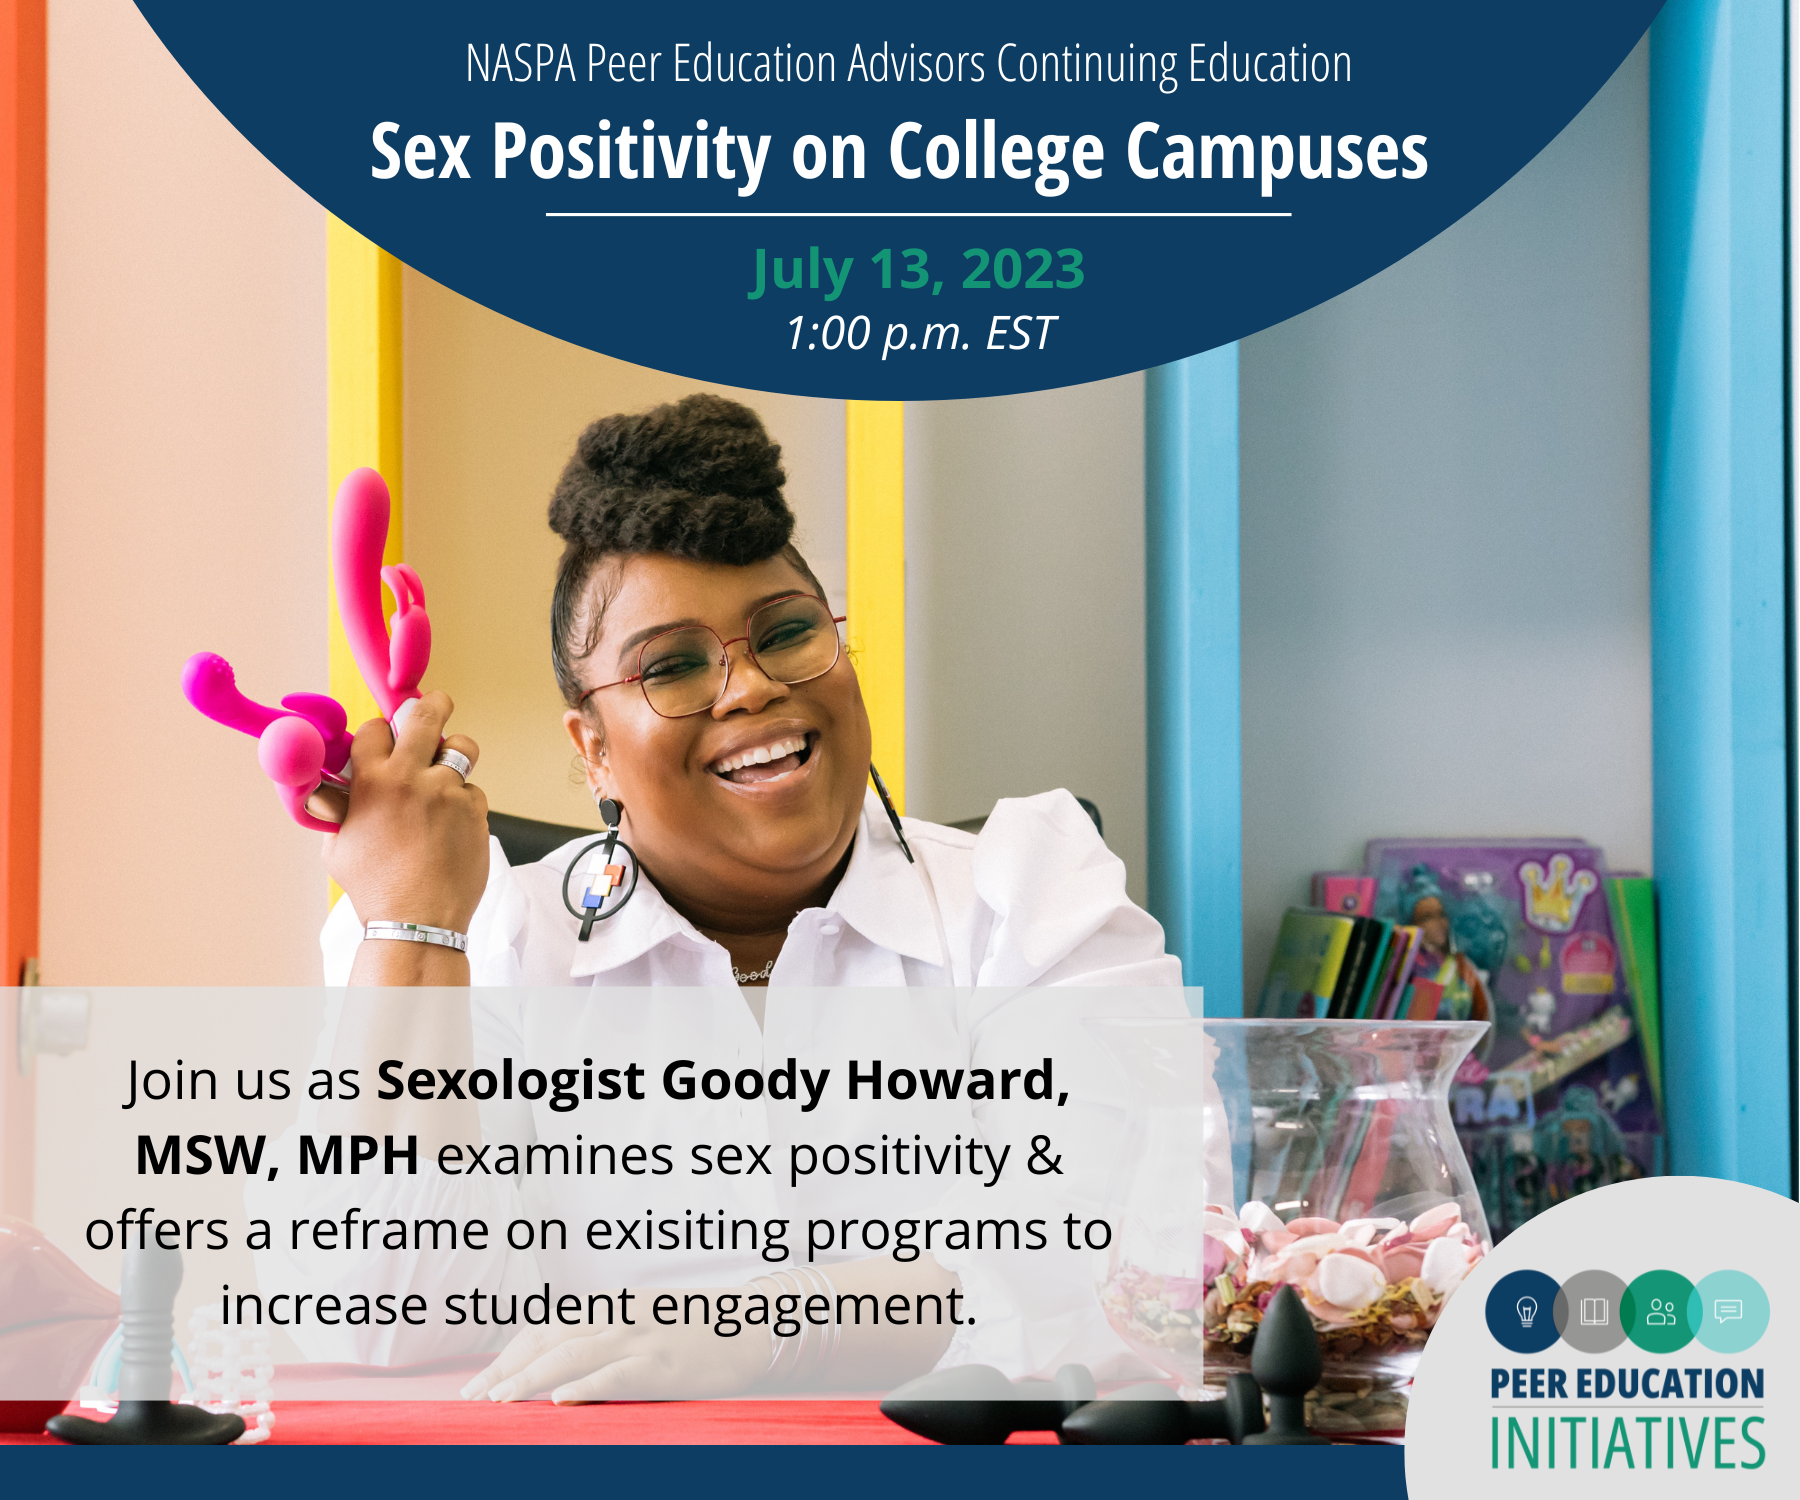 NASPA Peer Education Advisors Continuing Education: Improving Sex Positivity on College Campuses